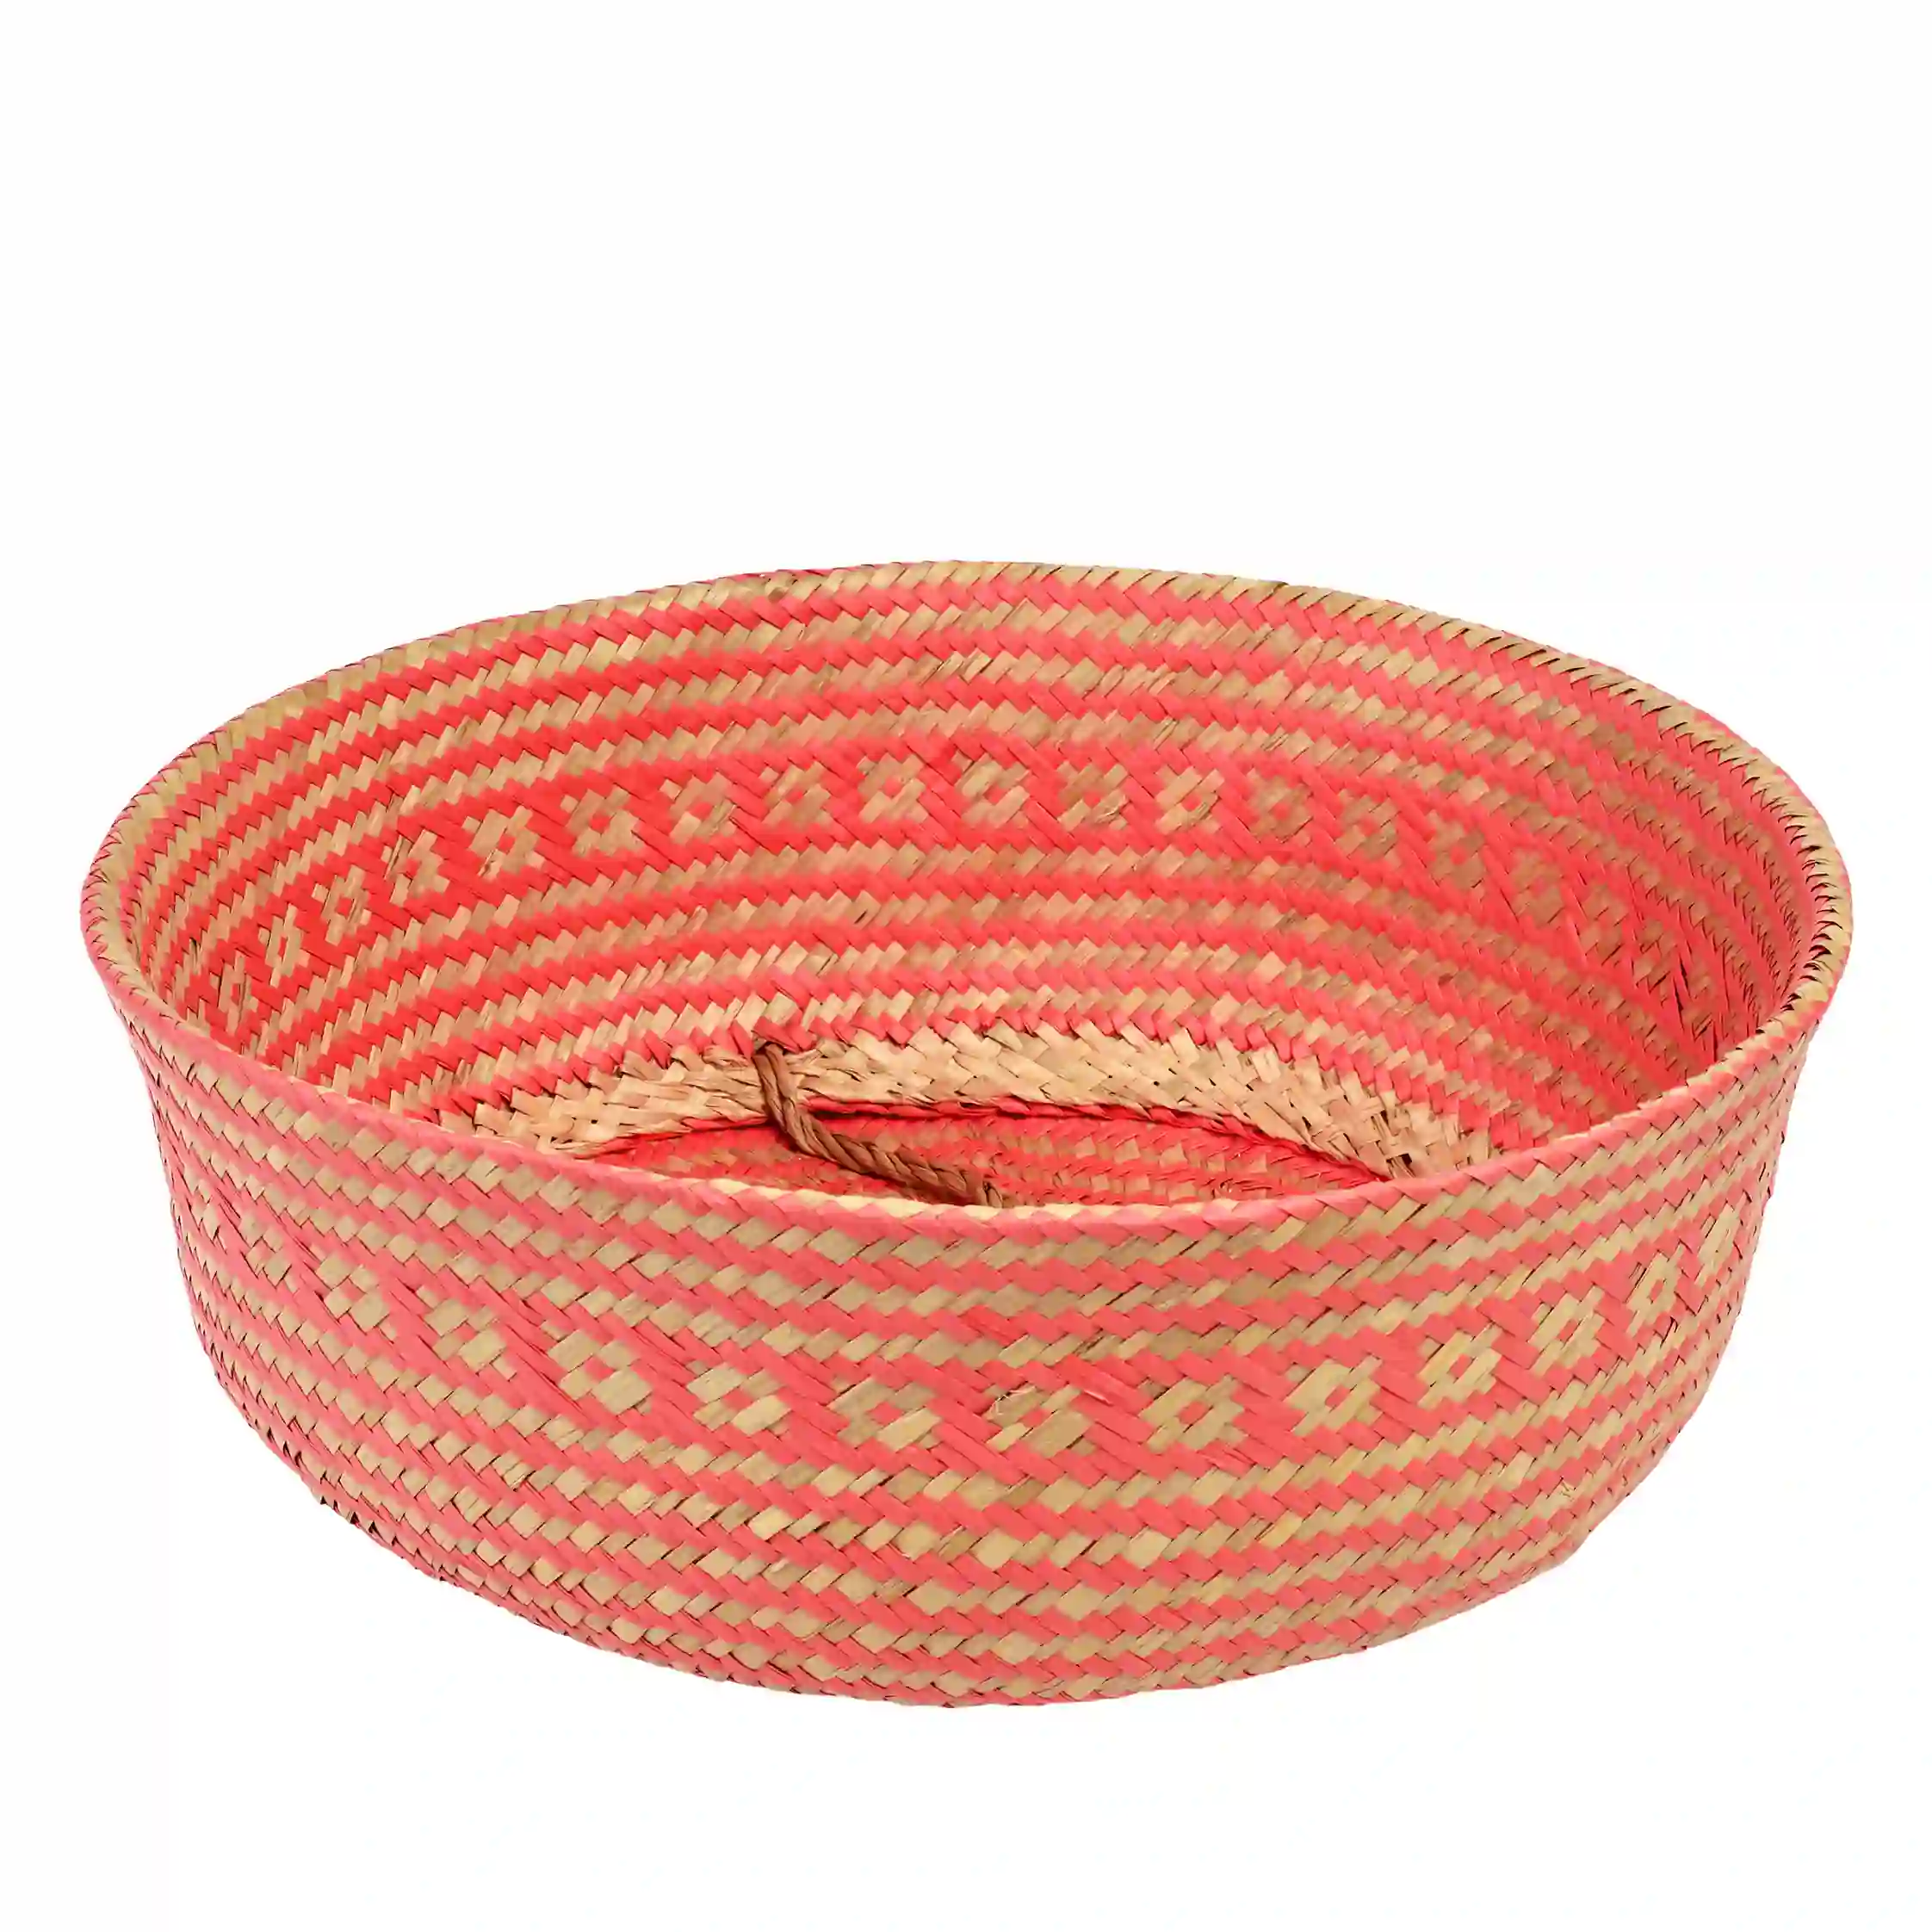 large seagrass basket - coral